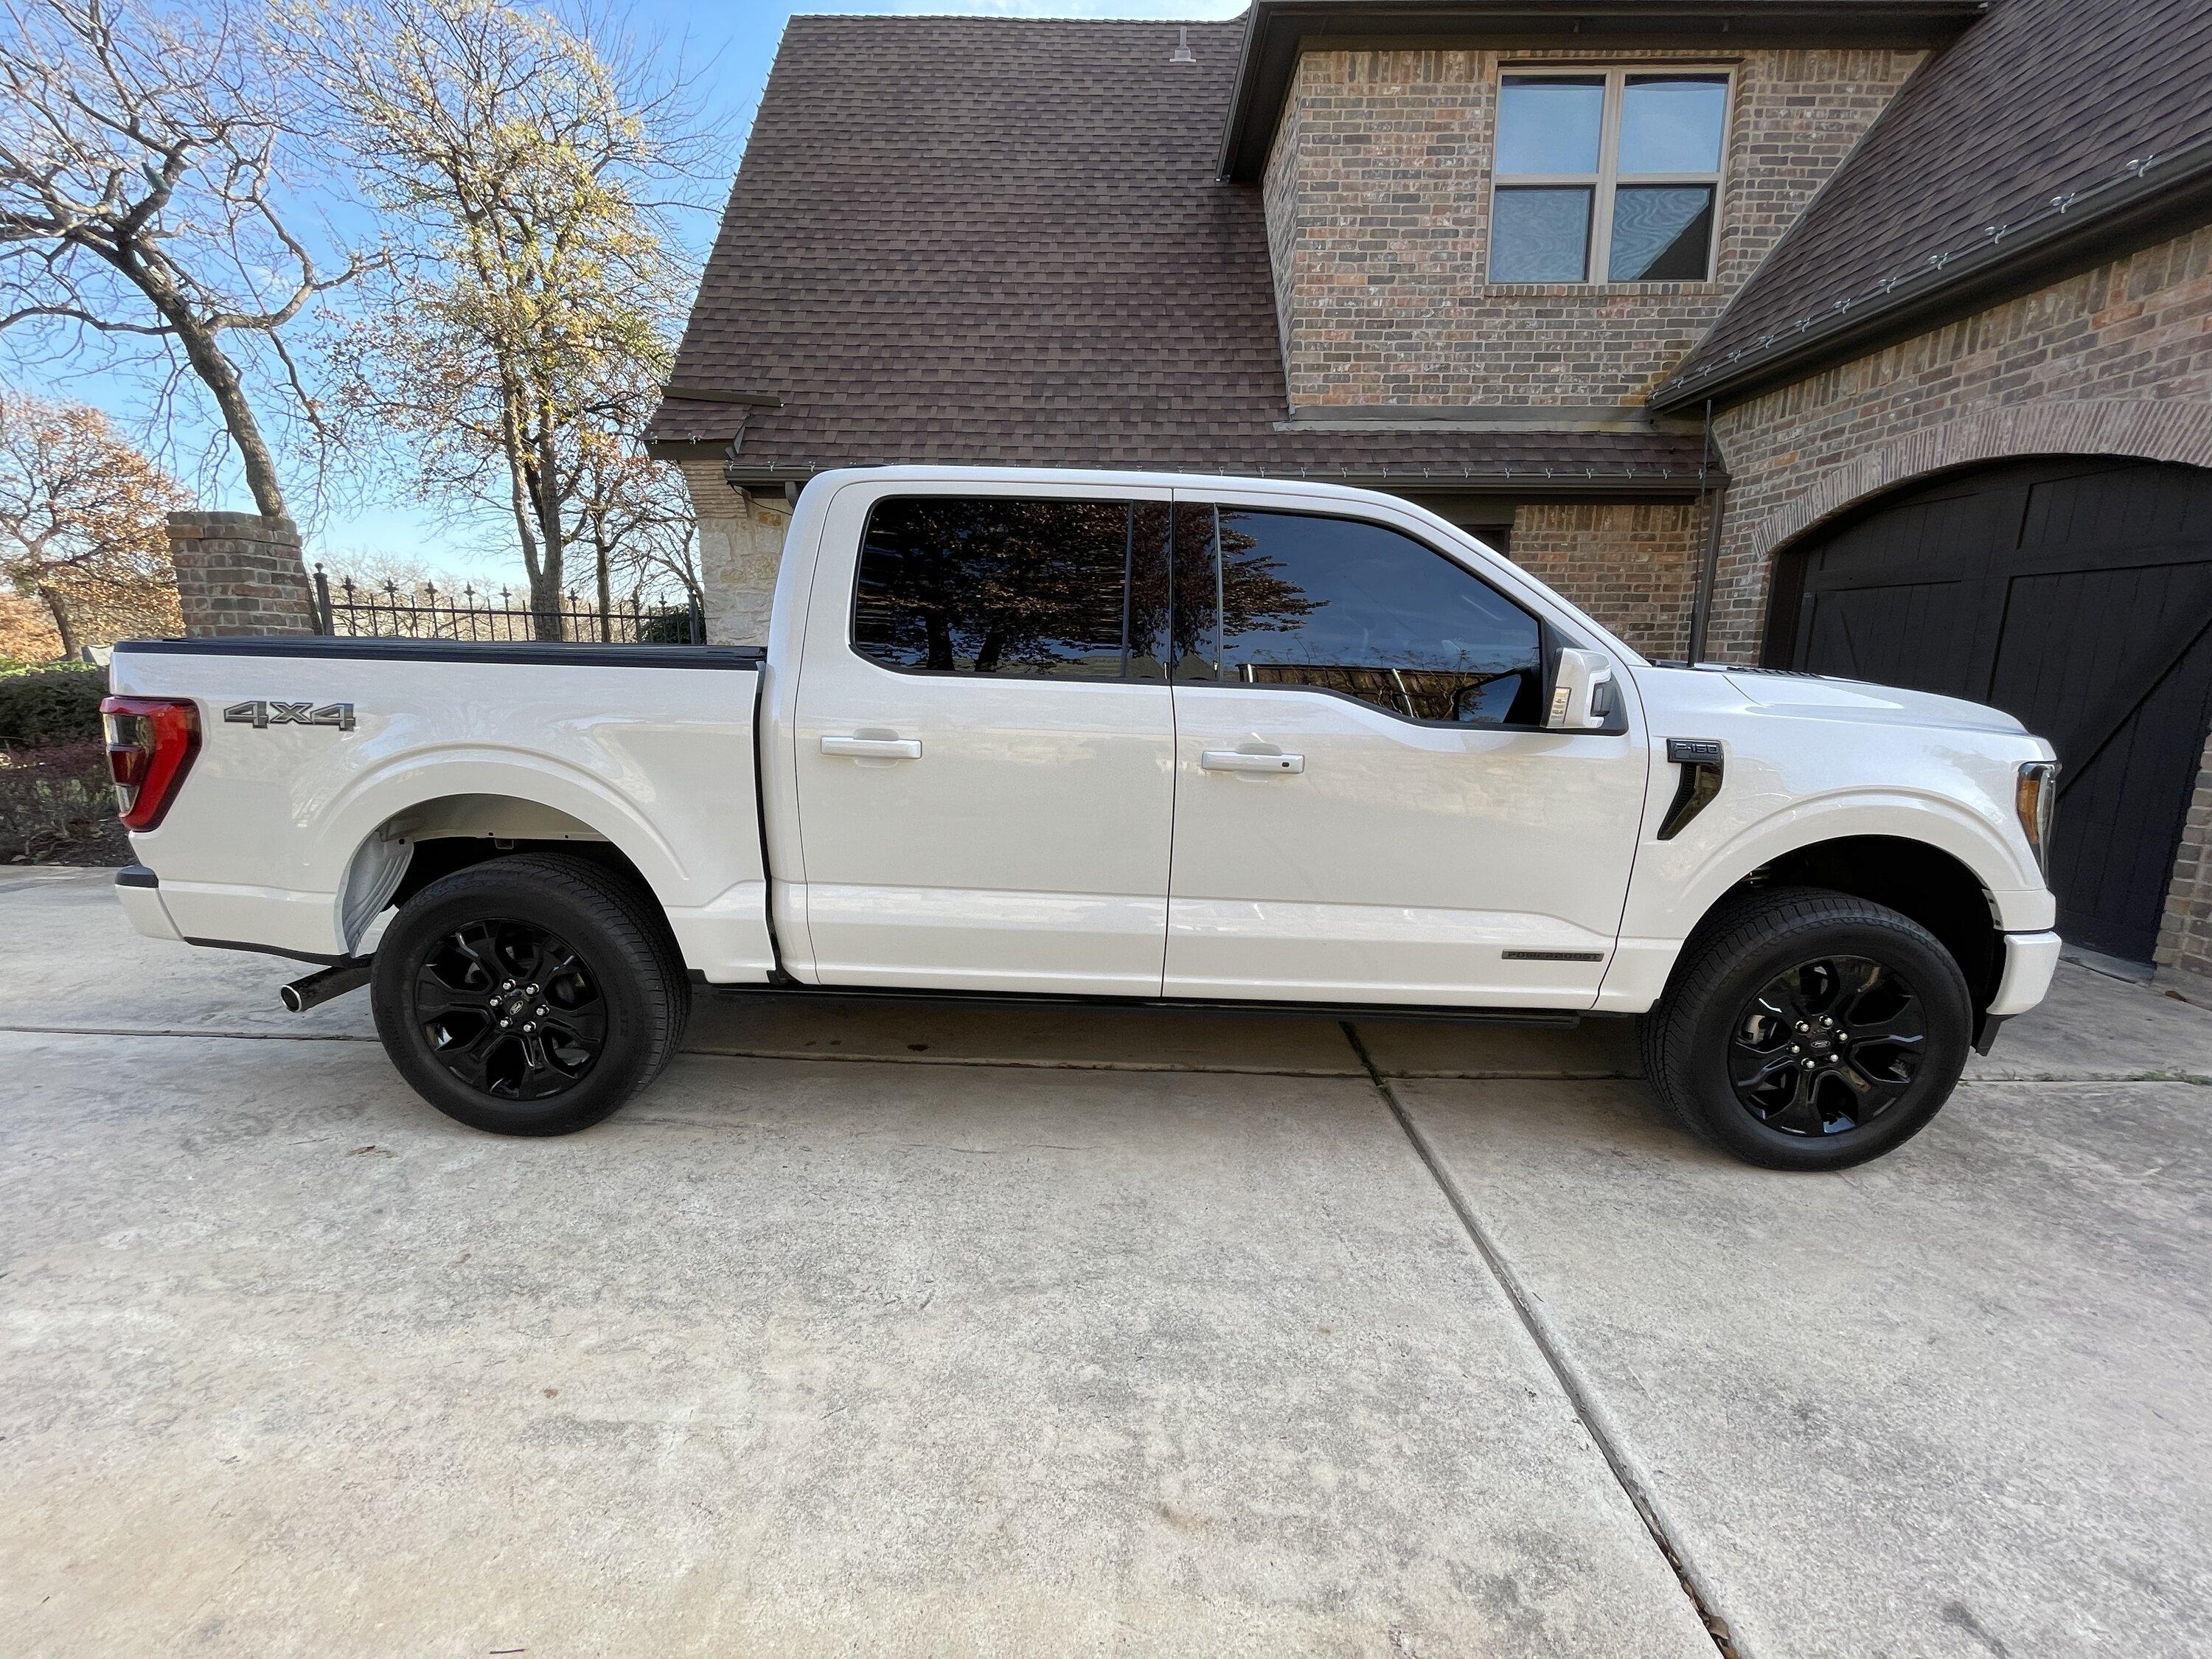 Ford F-150 Powerboost Leveling Kit Fail (2015-2020 Fox 2.0 “Tuned by Ford Performance” leveling kit) 605136AD-AD5D-4D4D-92AB-41280EEB0A72